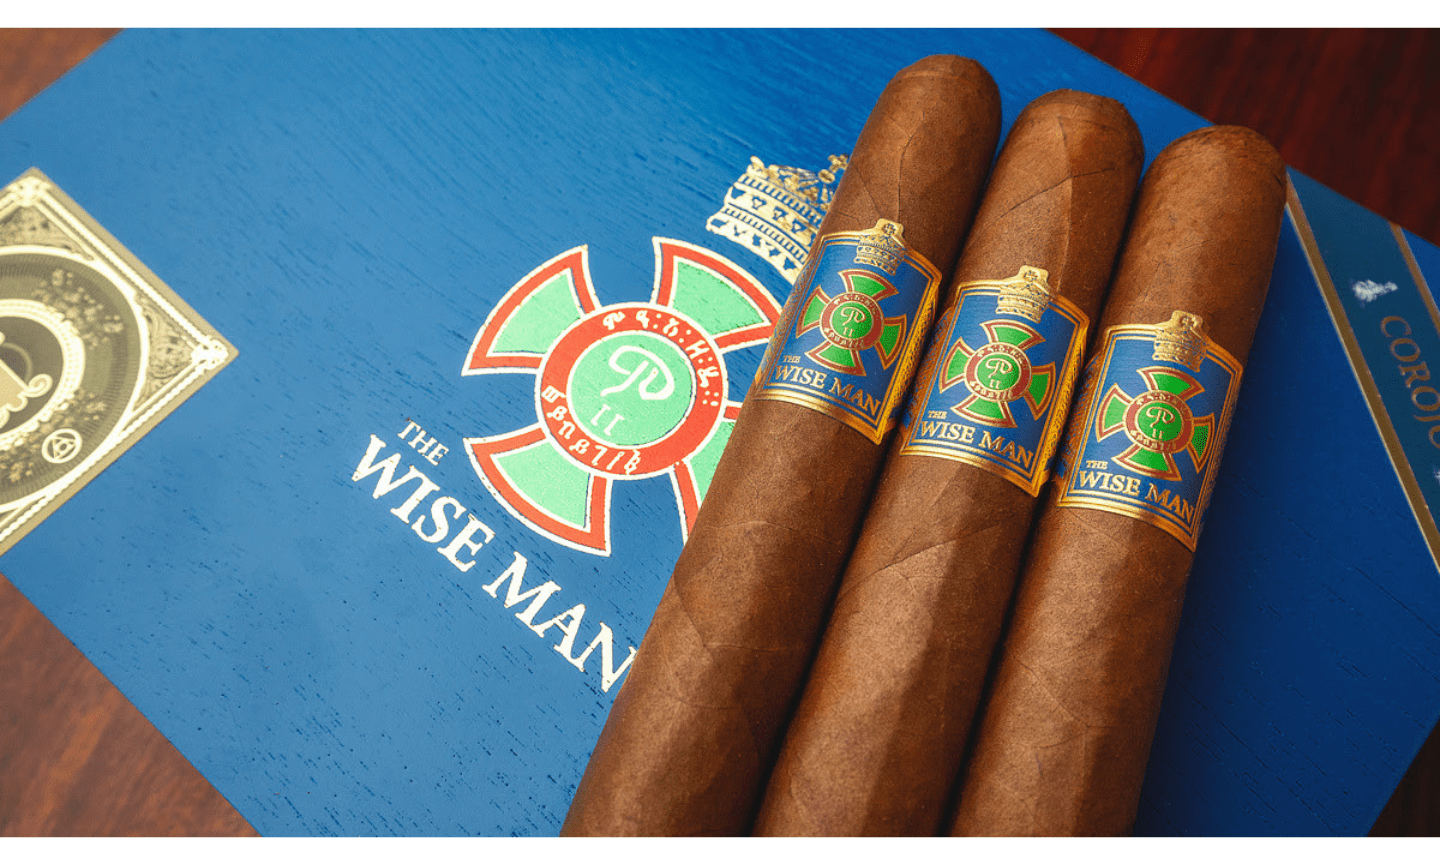 foundation-cigars-begins-shipping-the-new-wise-man-corojo-and-maduro